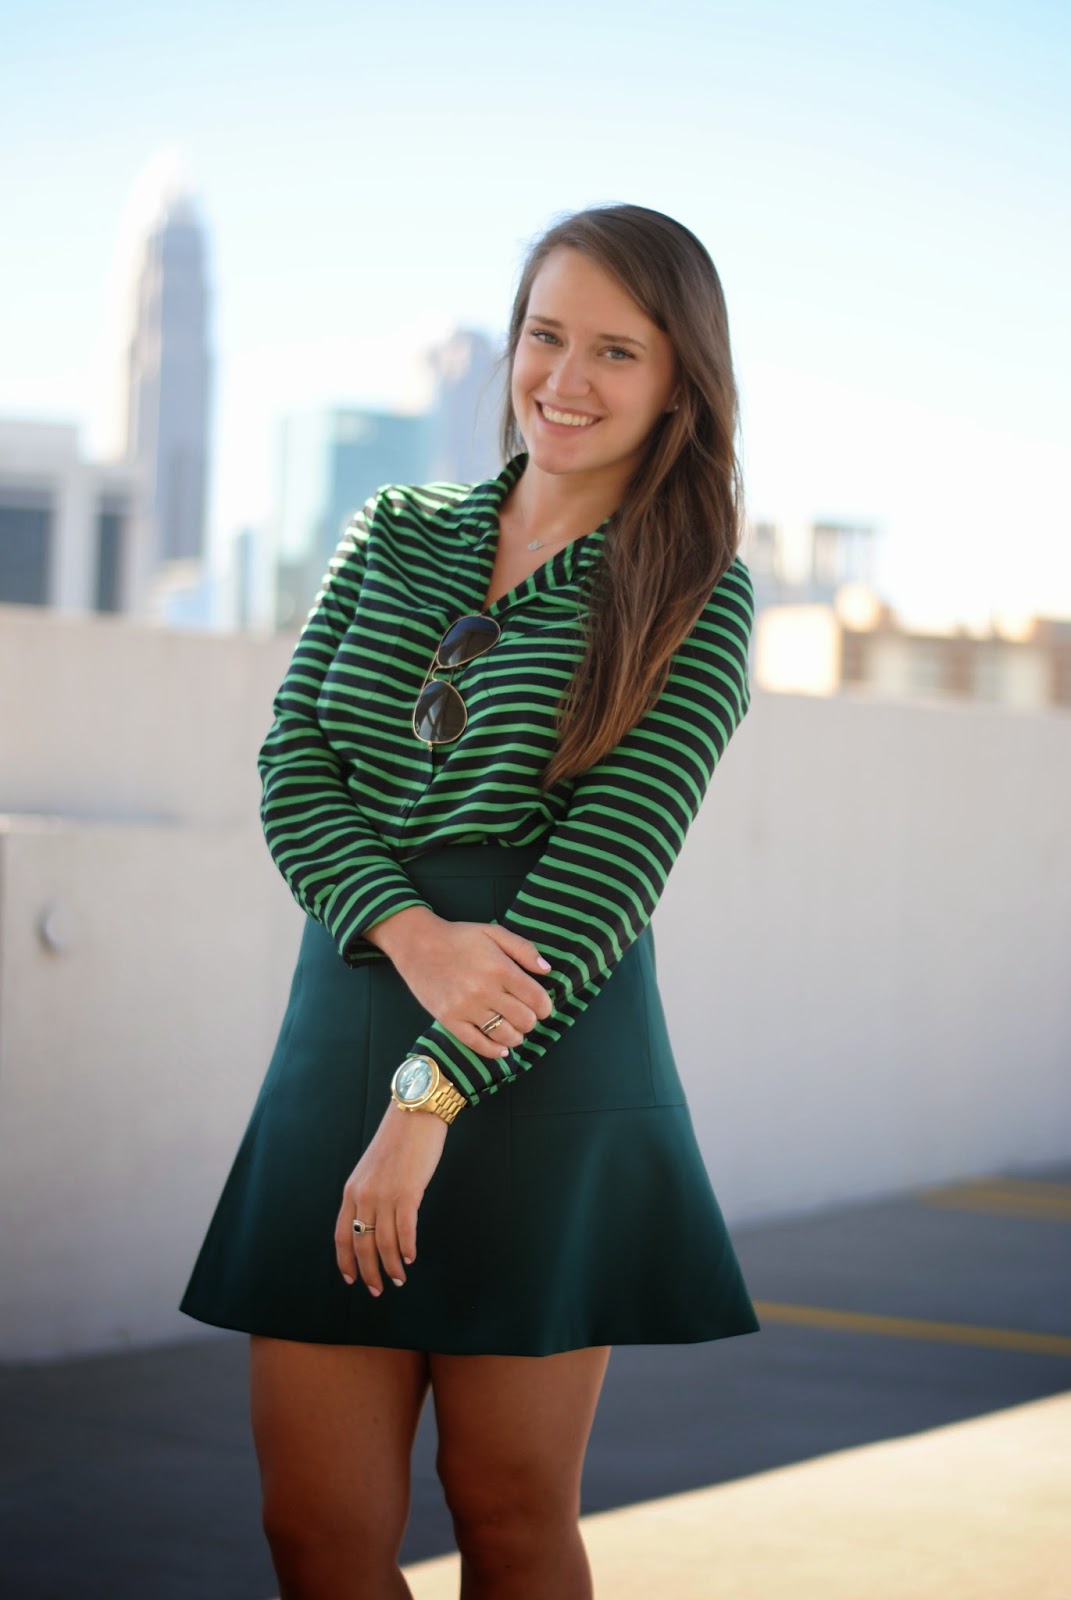 Green Outfit, NYC Rooftop